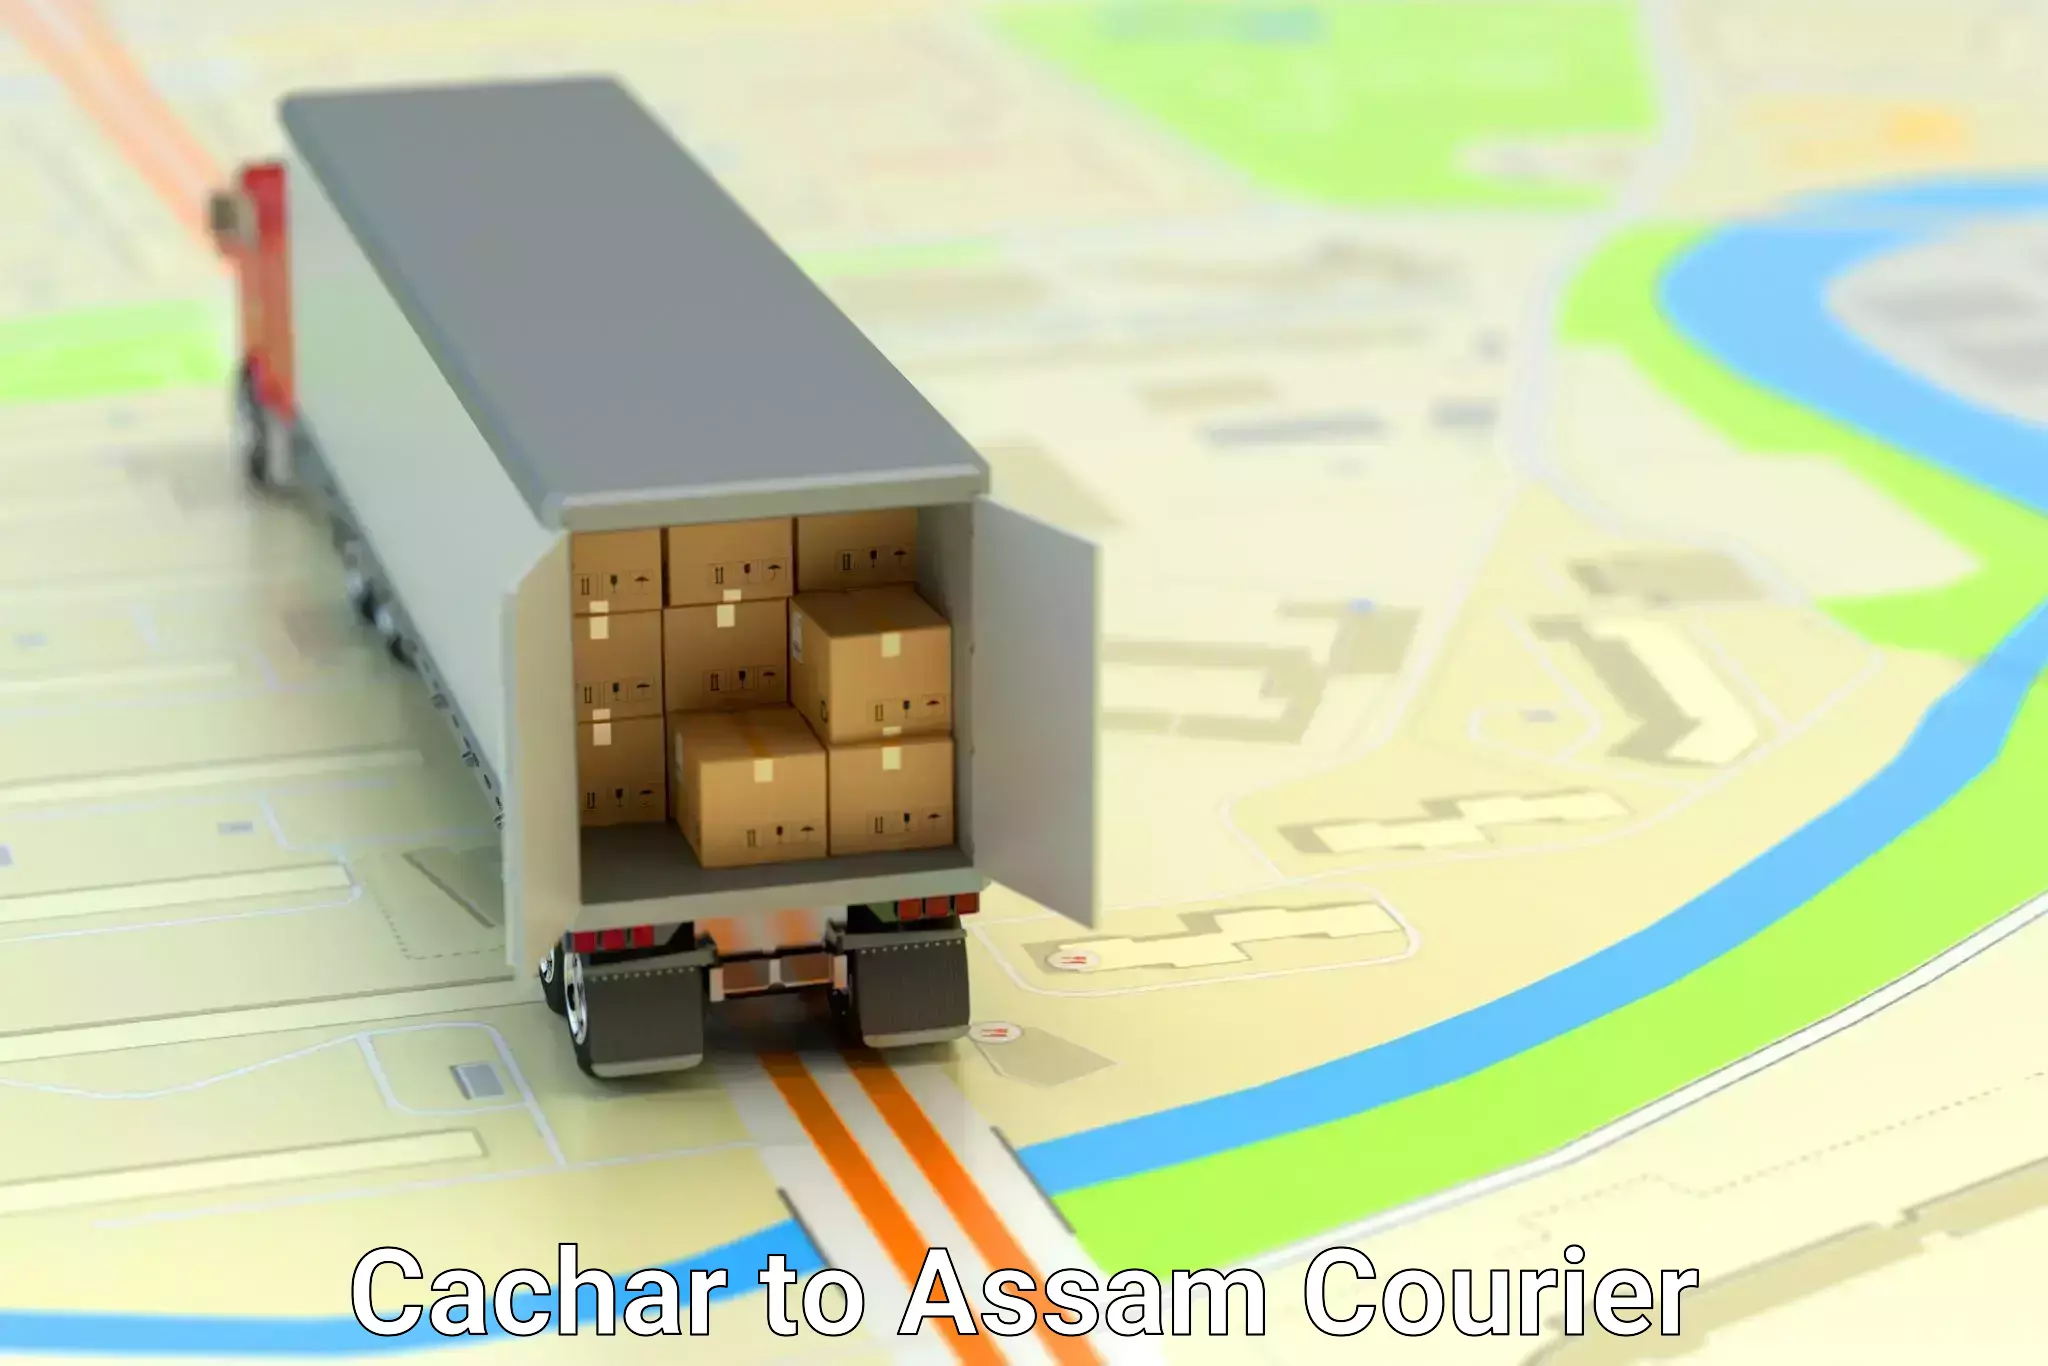 High-performance logistics in Cachar to Hojai